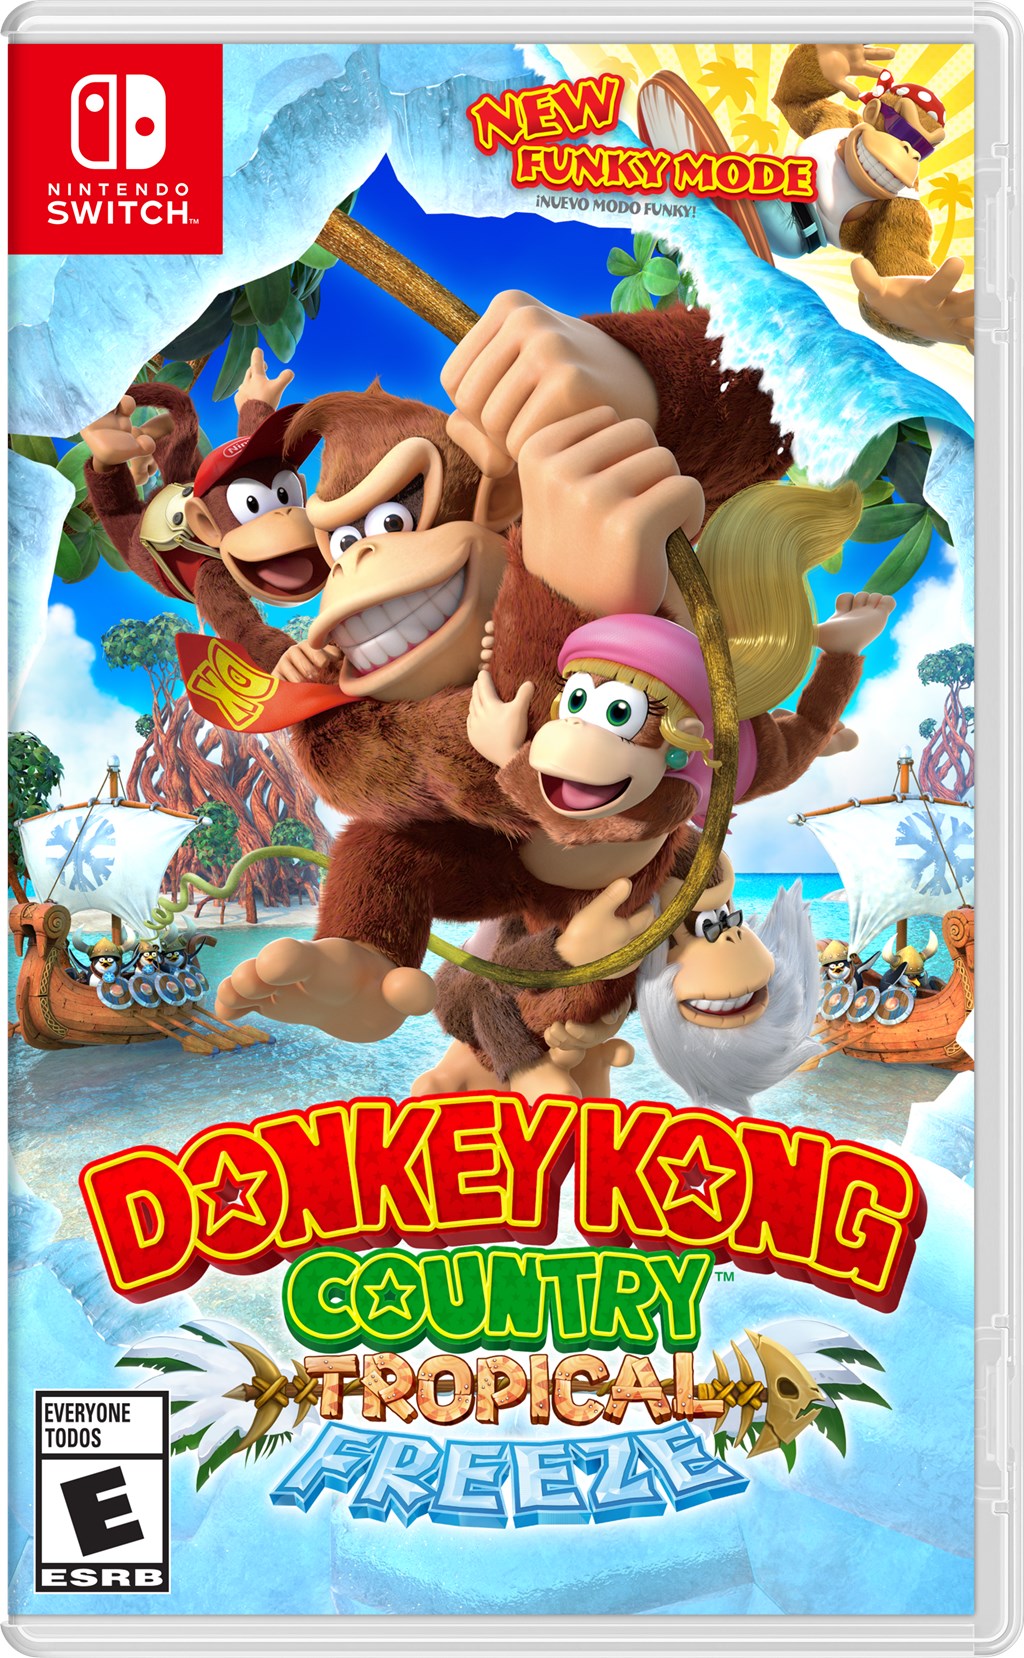 download donkey kong for nintendo switch